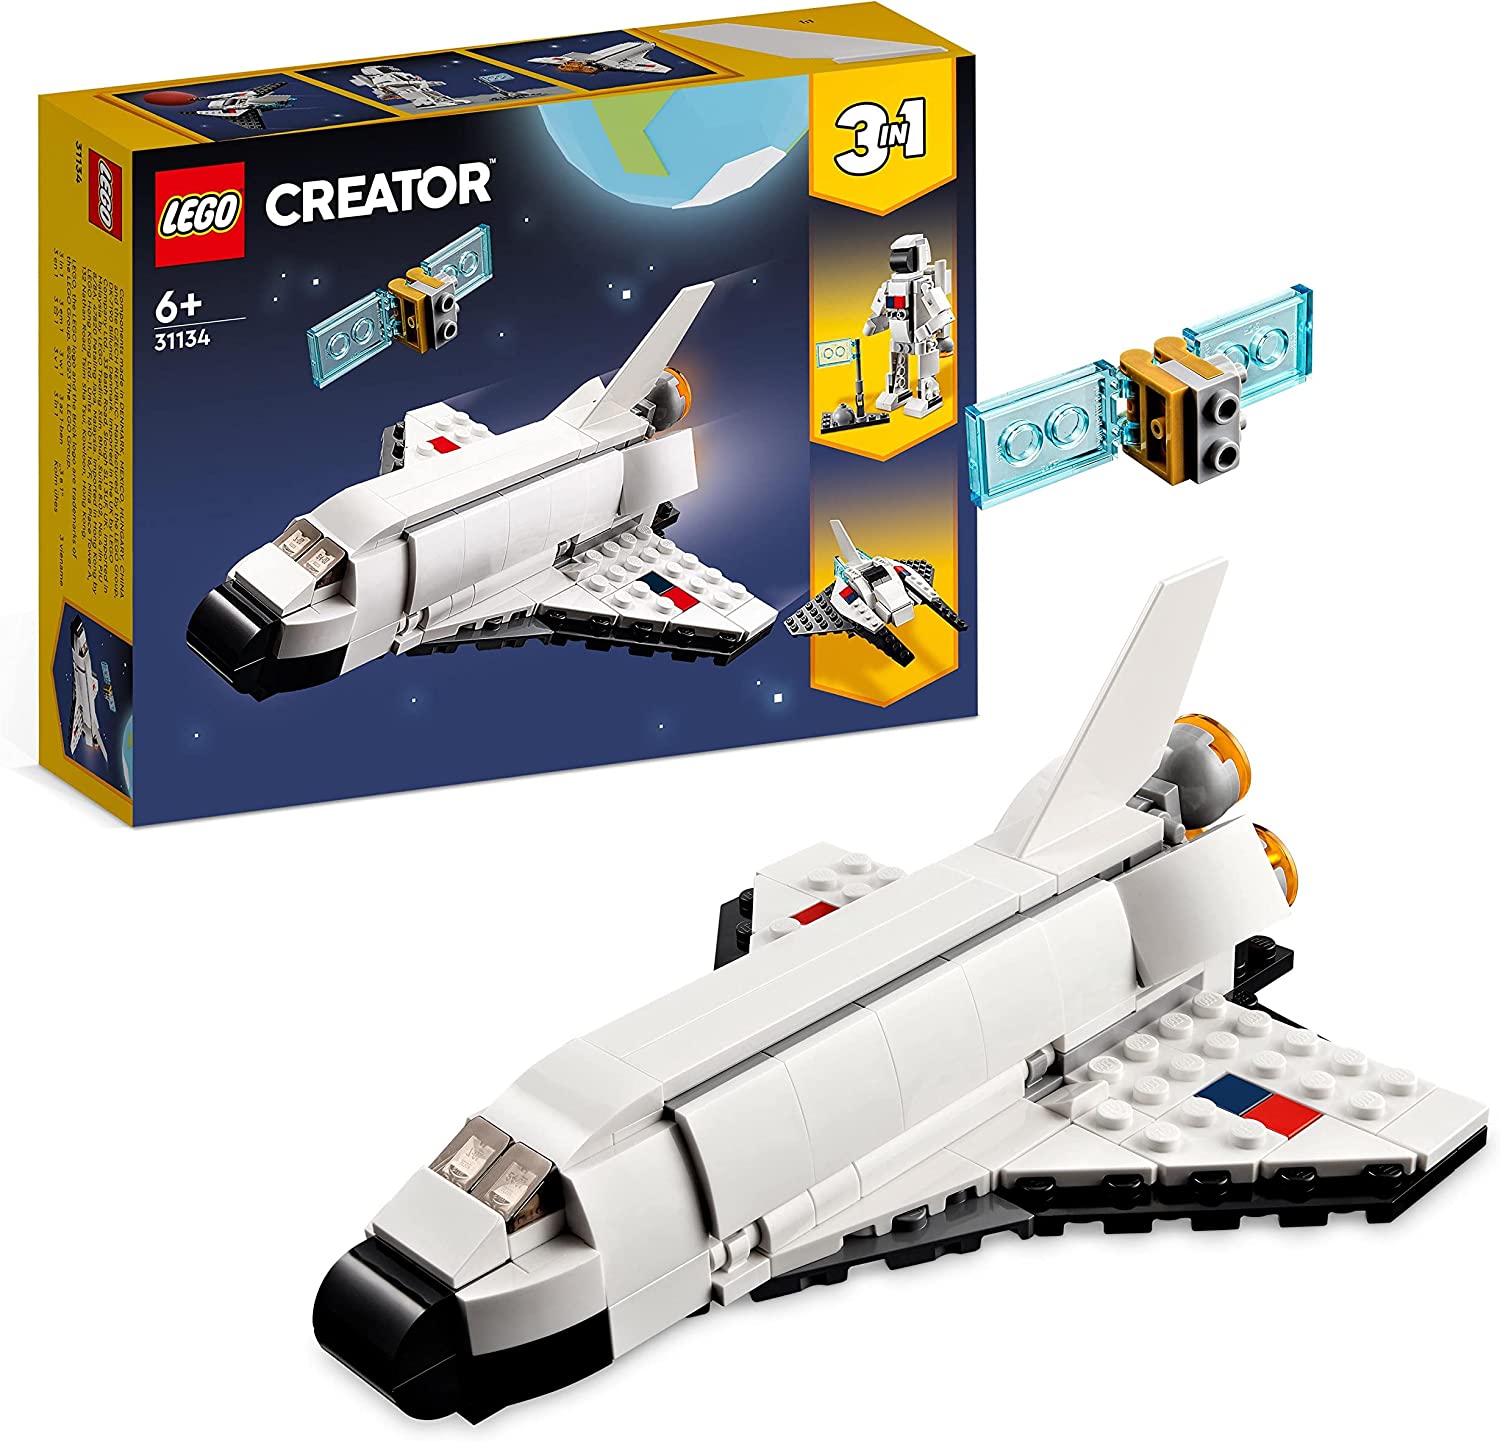 LEGO 31134 Creator 3-in-1 Spaceshuttle Toy for Astronaut to Spaceship, Construction Toy for Children, Boys, Girls From 6 Years, Creative Gift Idea